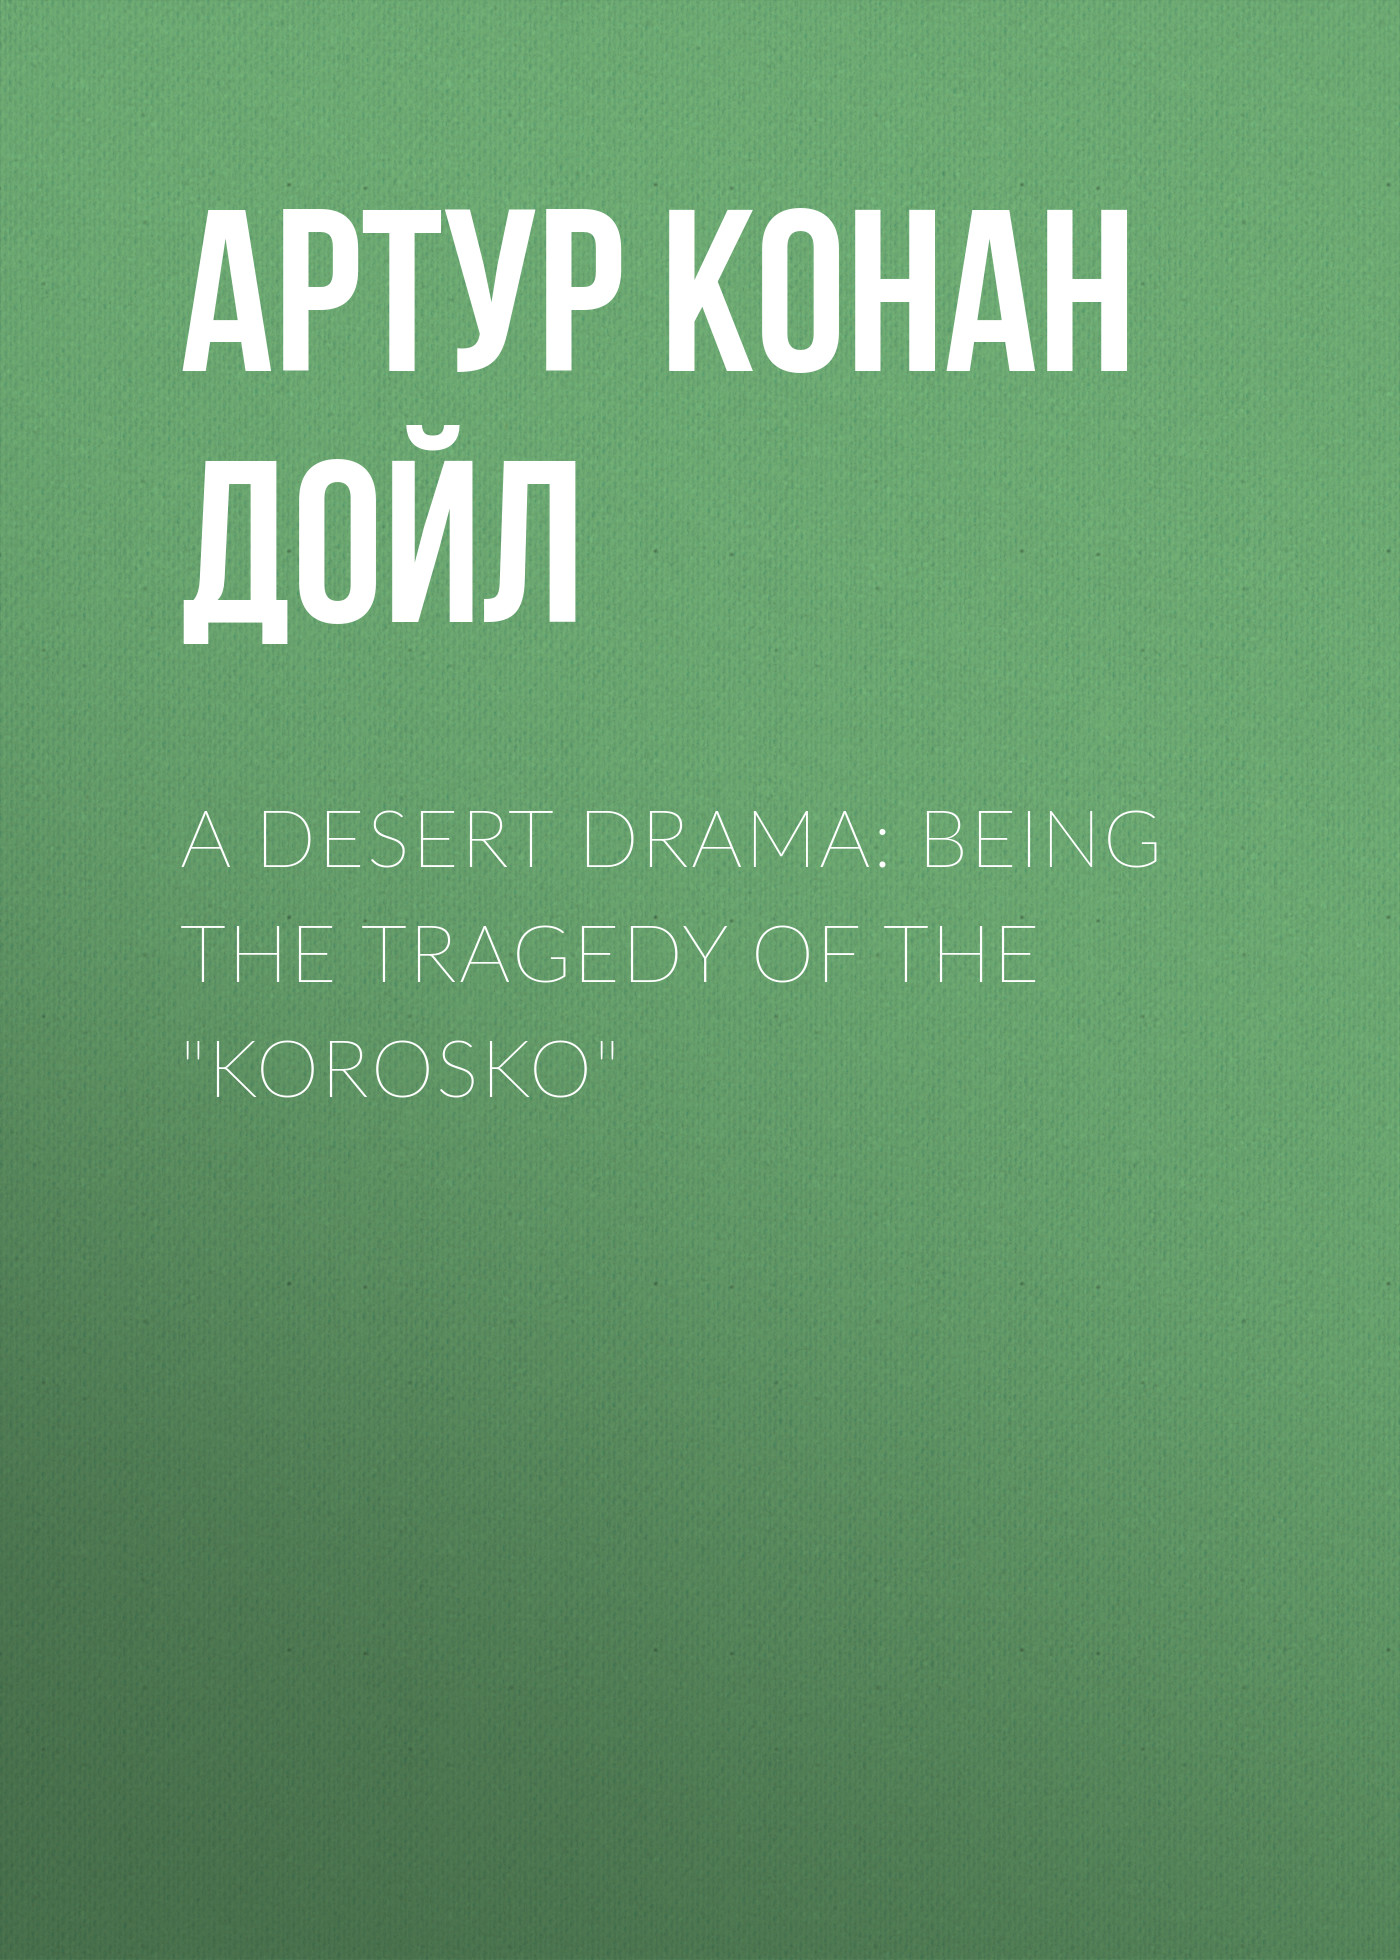 A Desert Drama: Being The Tragedy Of The"Korosko"